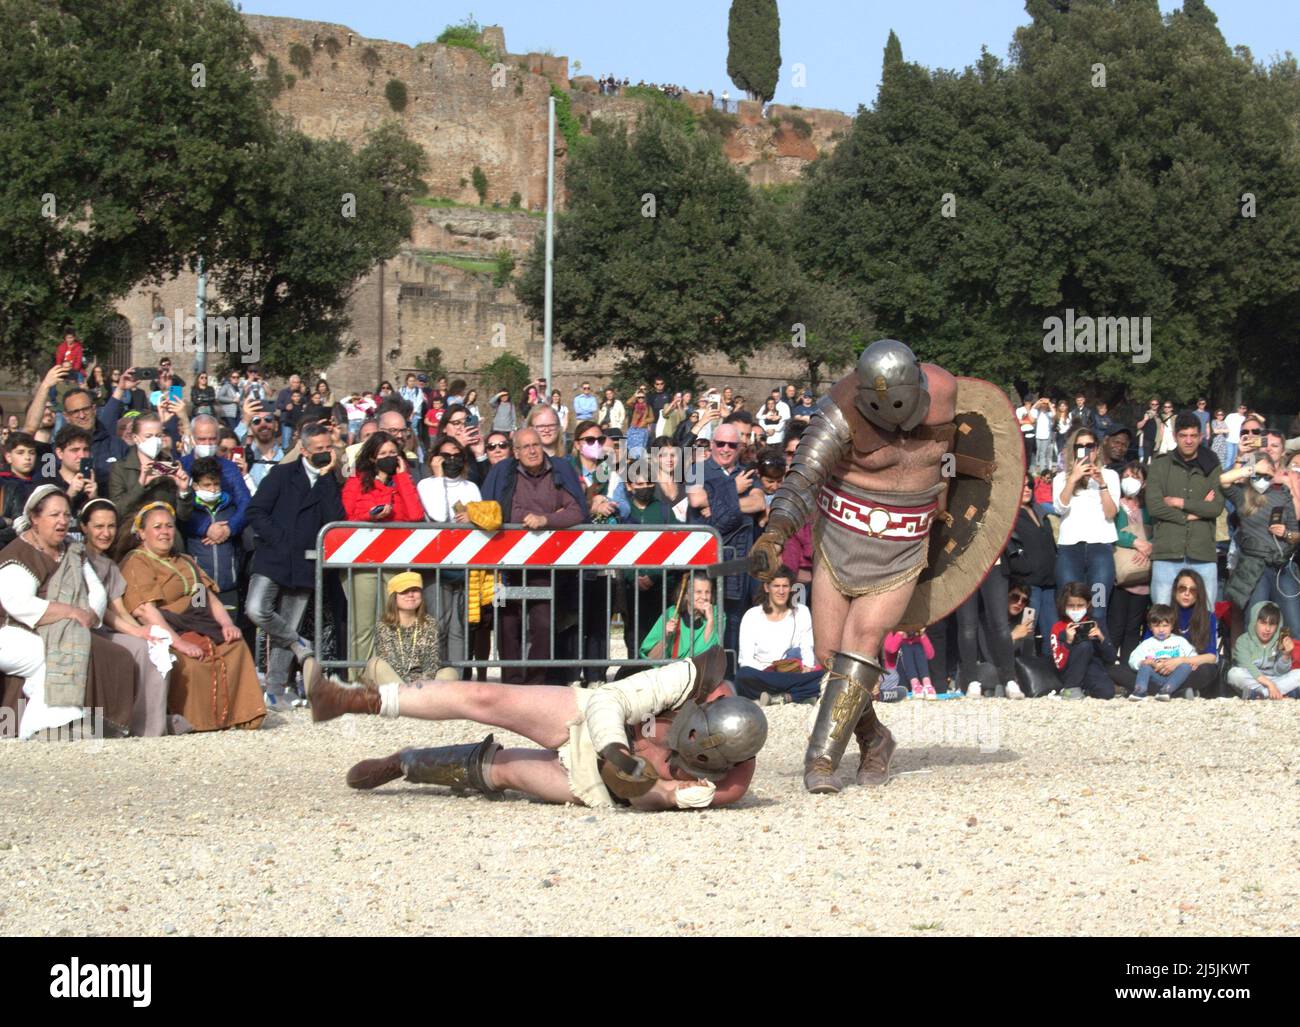 Rome, Italy. 23rd Apr, 2022. On the occasion of the celebrations to commemorate the Birth of Rome (April 21 is the date linked to its foundation), at the Circus Maximus ancient Roman rites are re-enacted by the Roman Historical Group, such as the coronation of the 'Goddess Rome' and the fight among gladiators. (Photo by Patrizia Cortellessa/Pacific Press) Credit: Pacific Press Media Production Corp./Alamy Live News Stock Photo